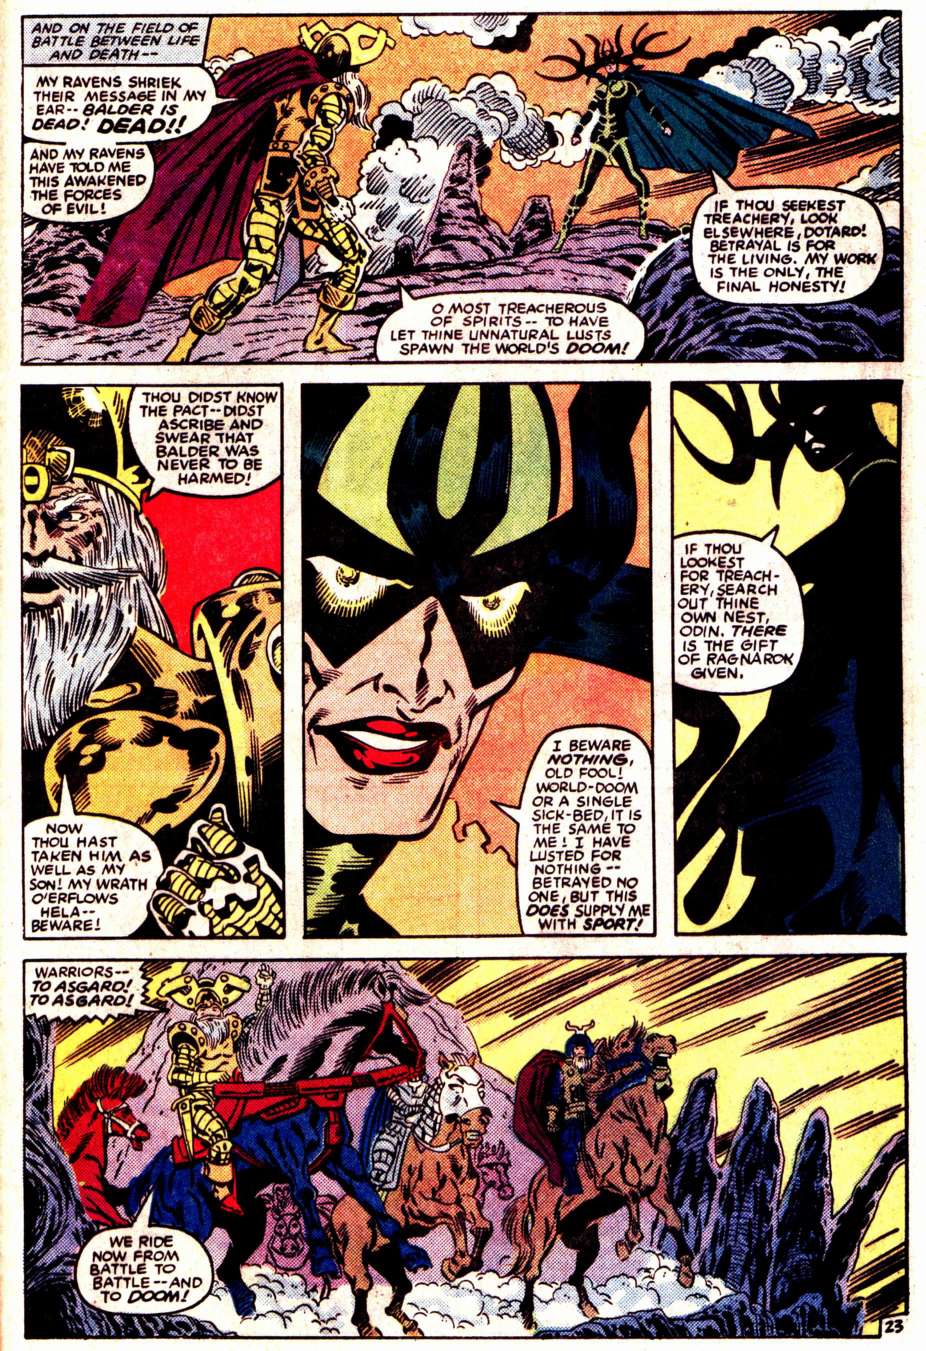 What If? (1977) issue 47 - Loki had found The hammer of Thor - Page 24